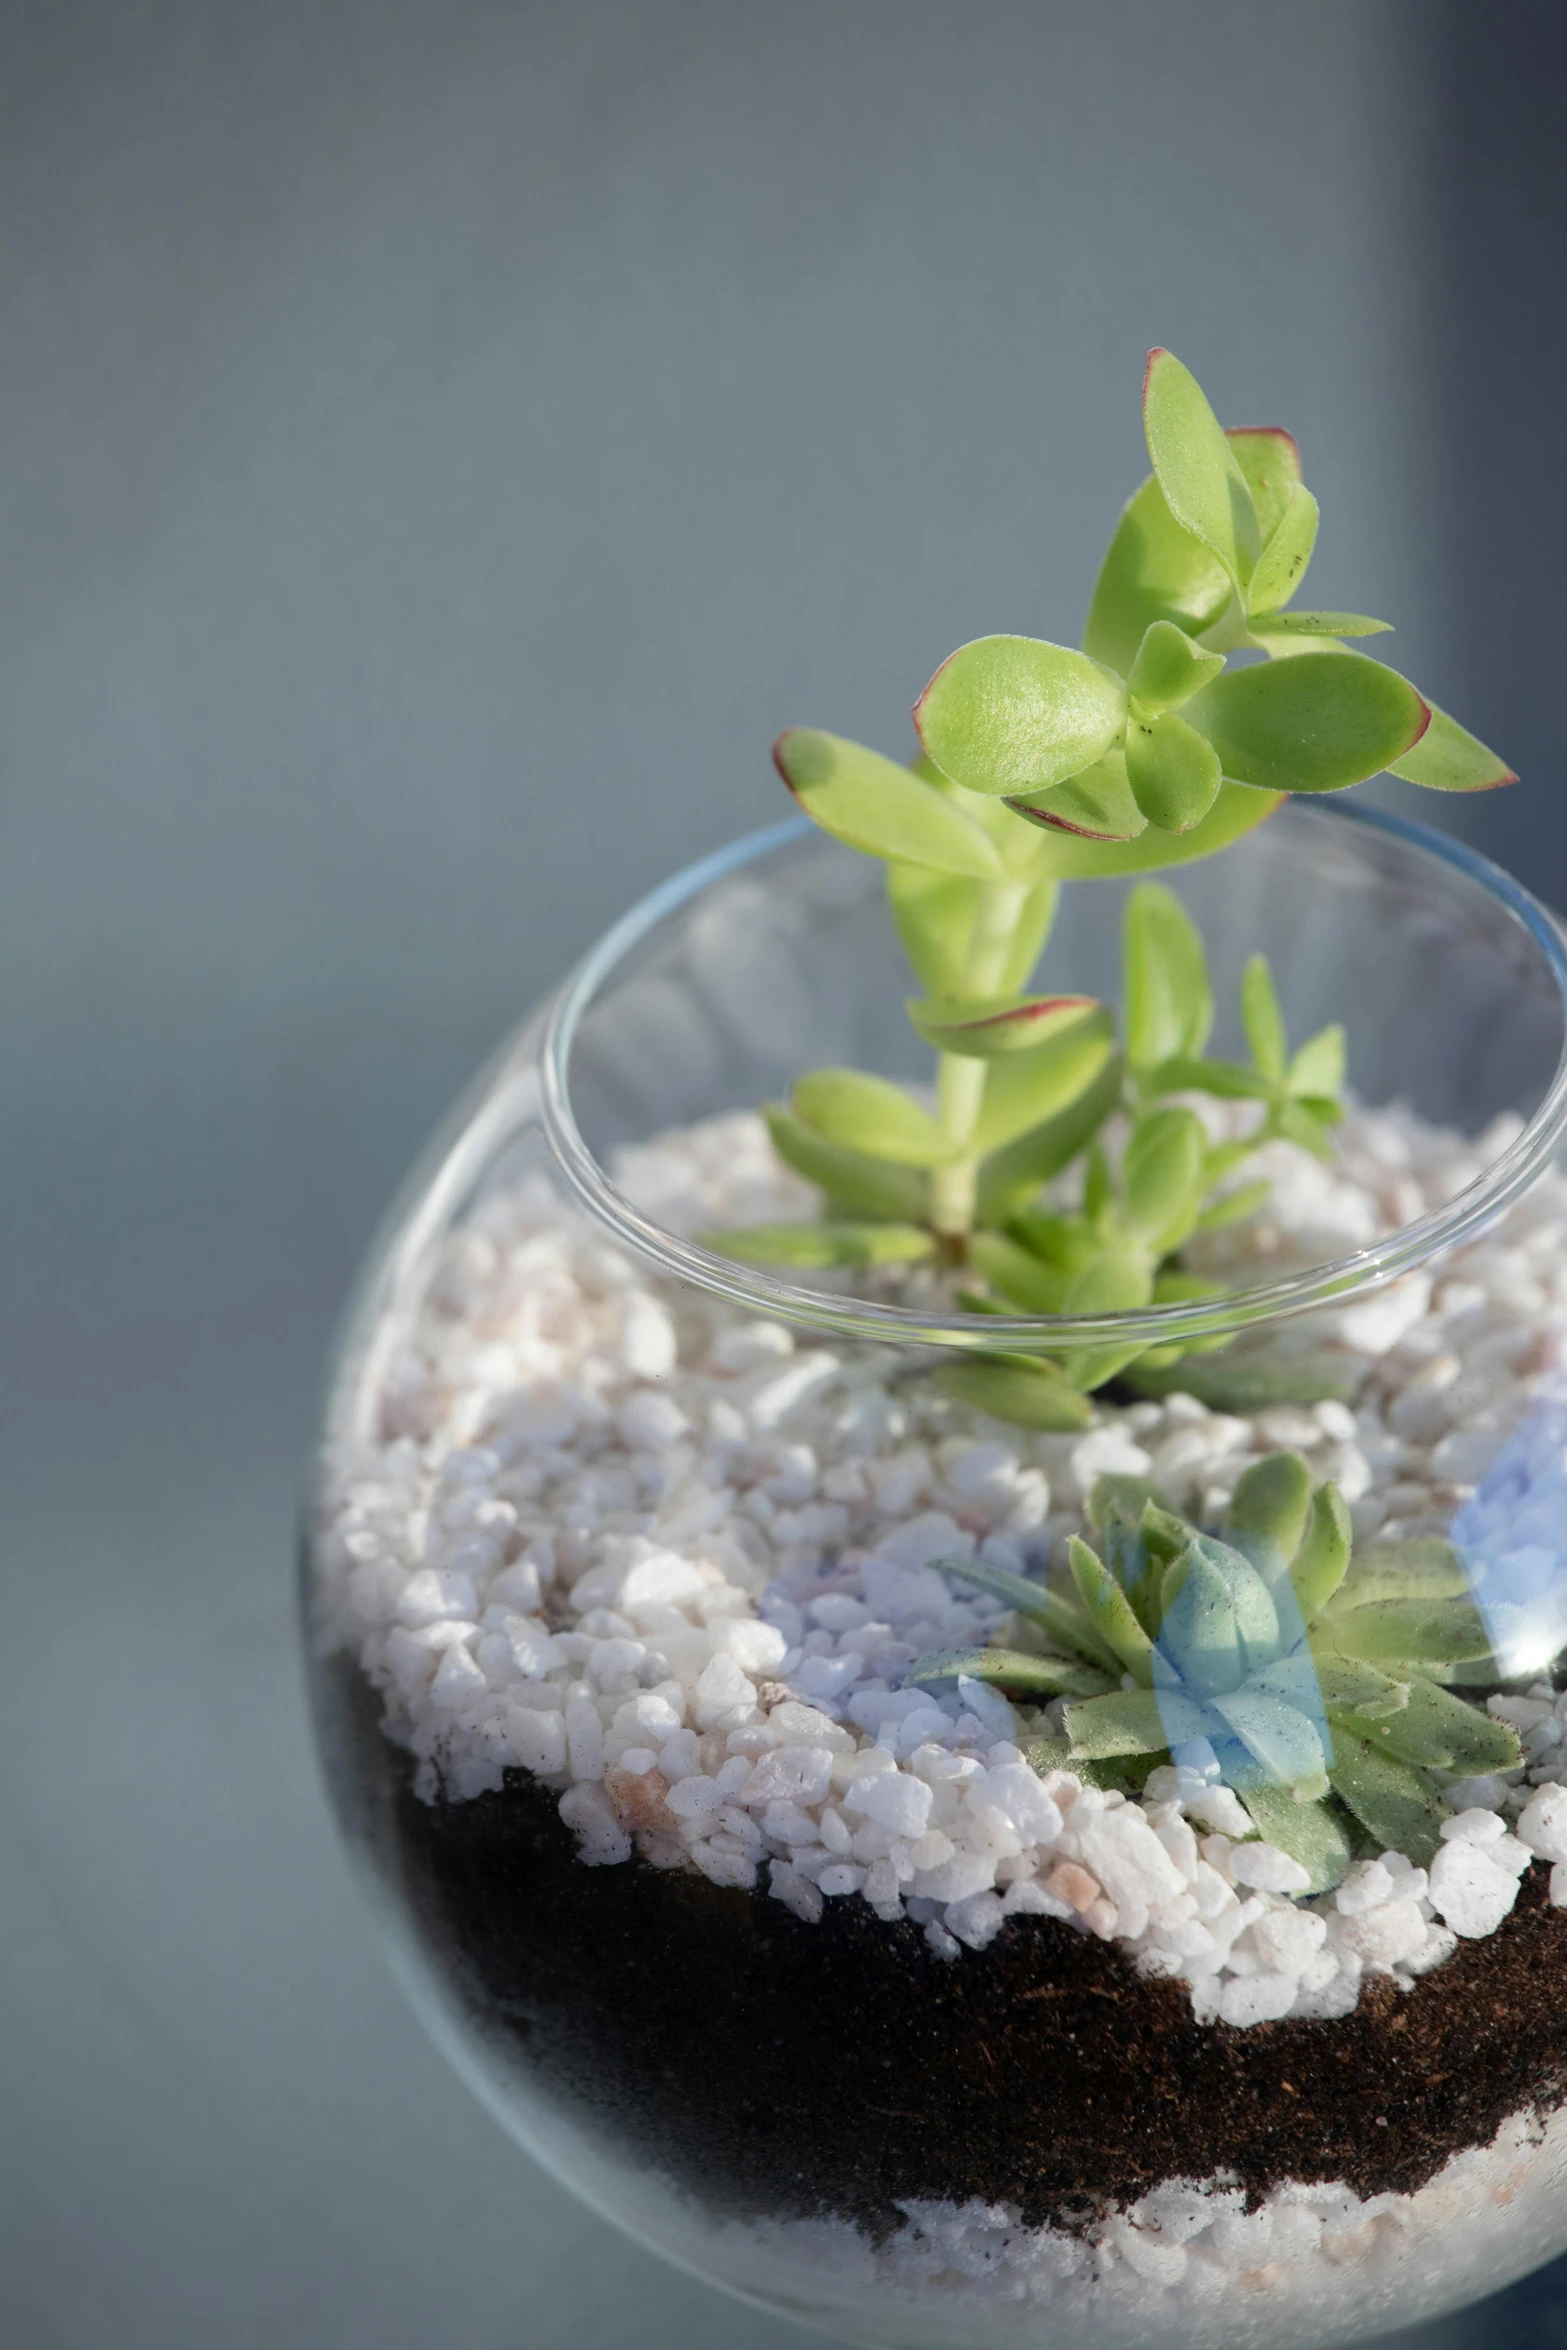 a close up of a plant in a glass vase, maroon and blue accents, mini planets, highly detailded, slate